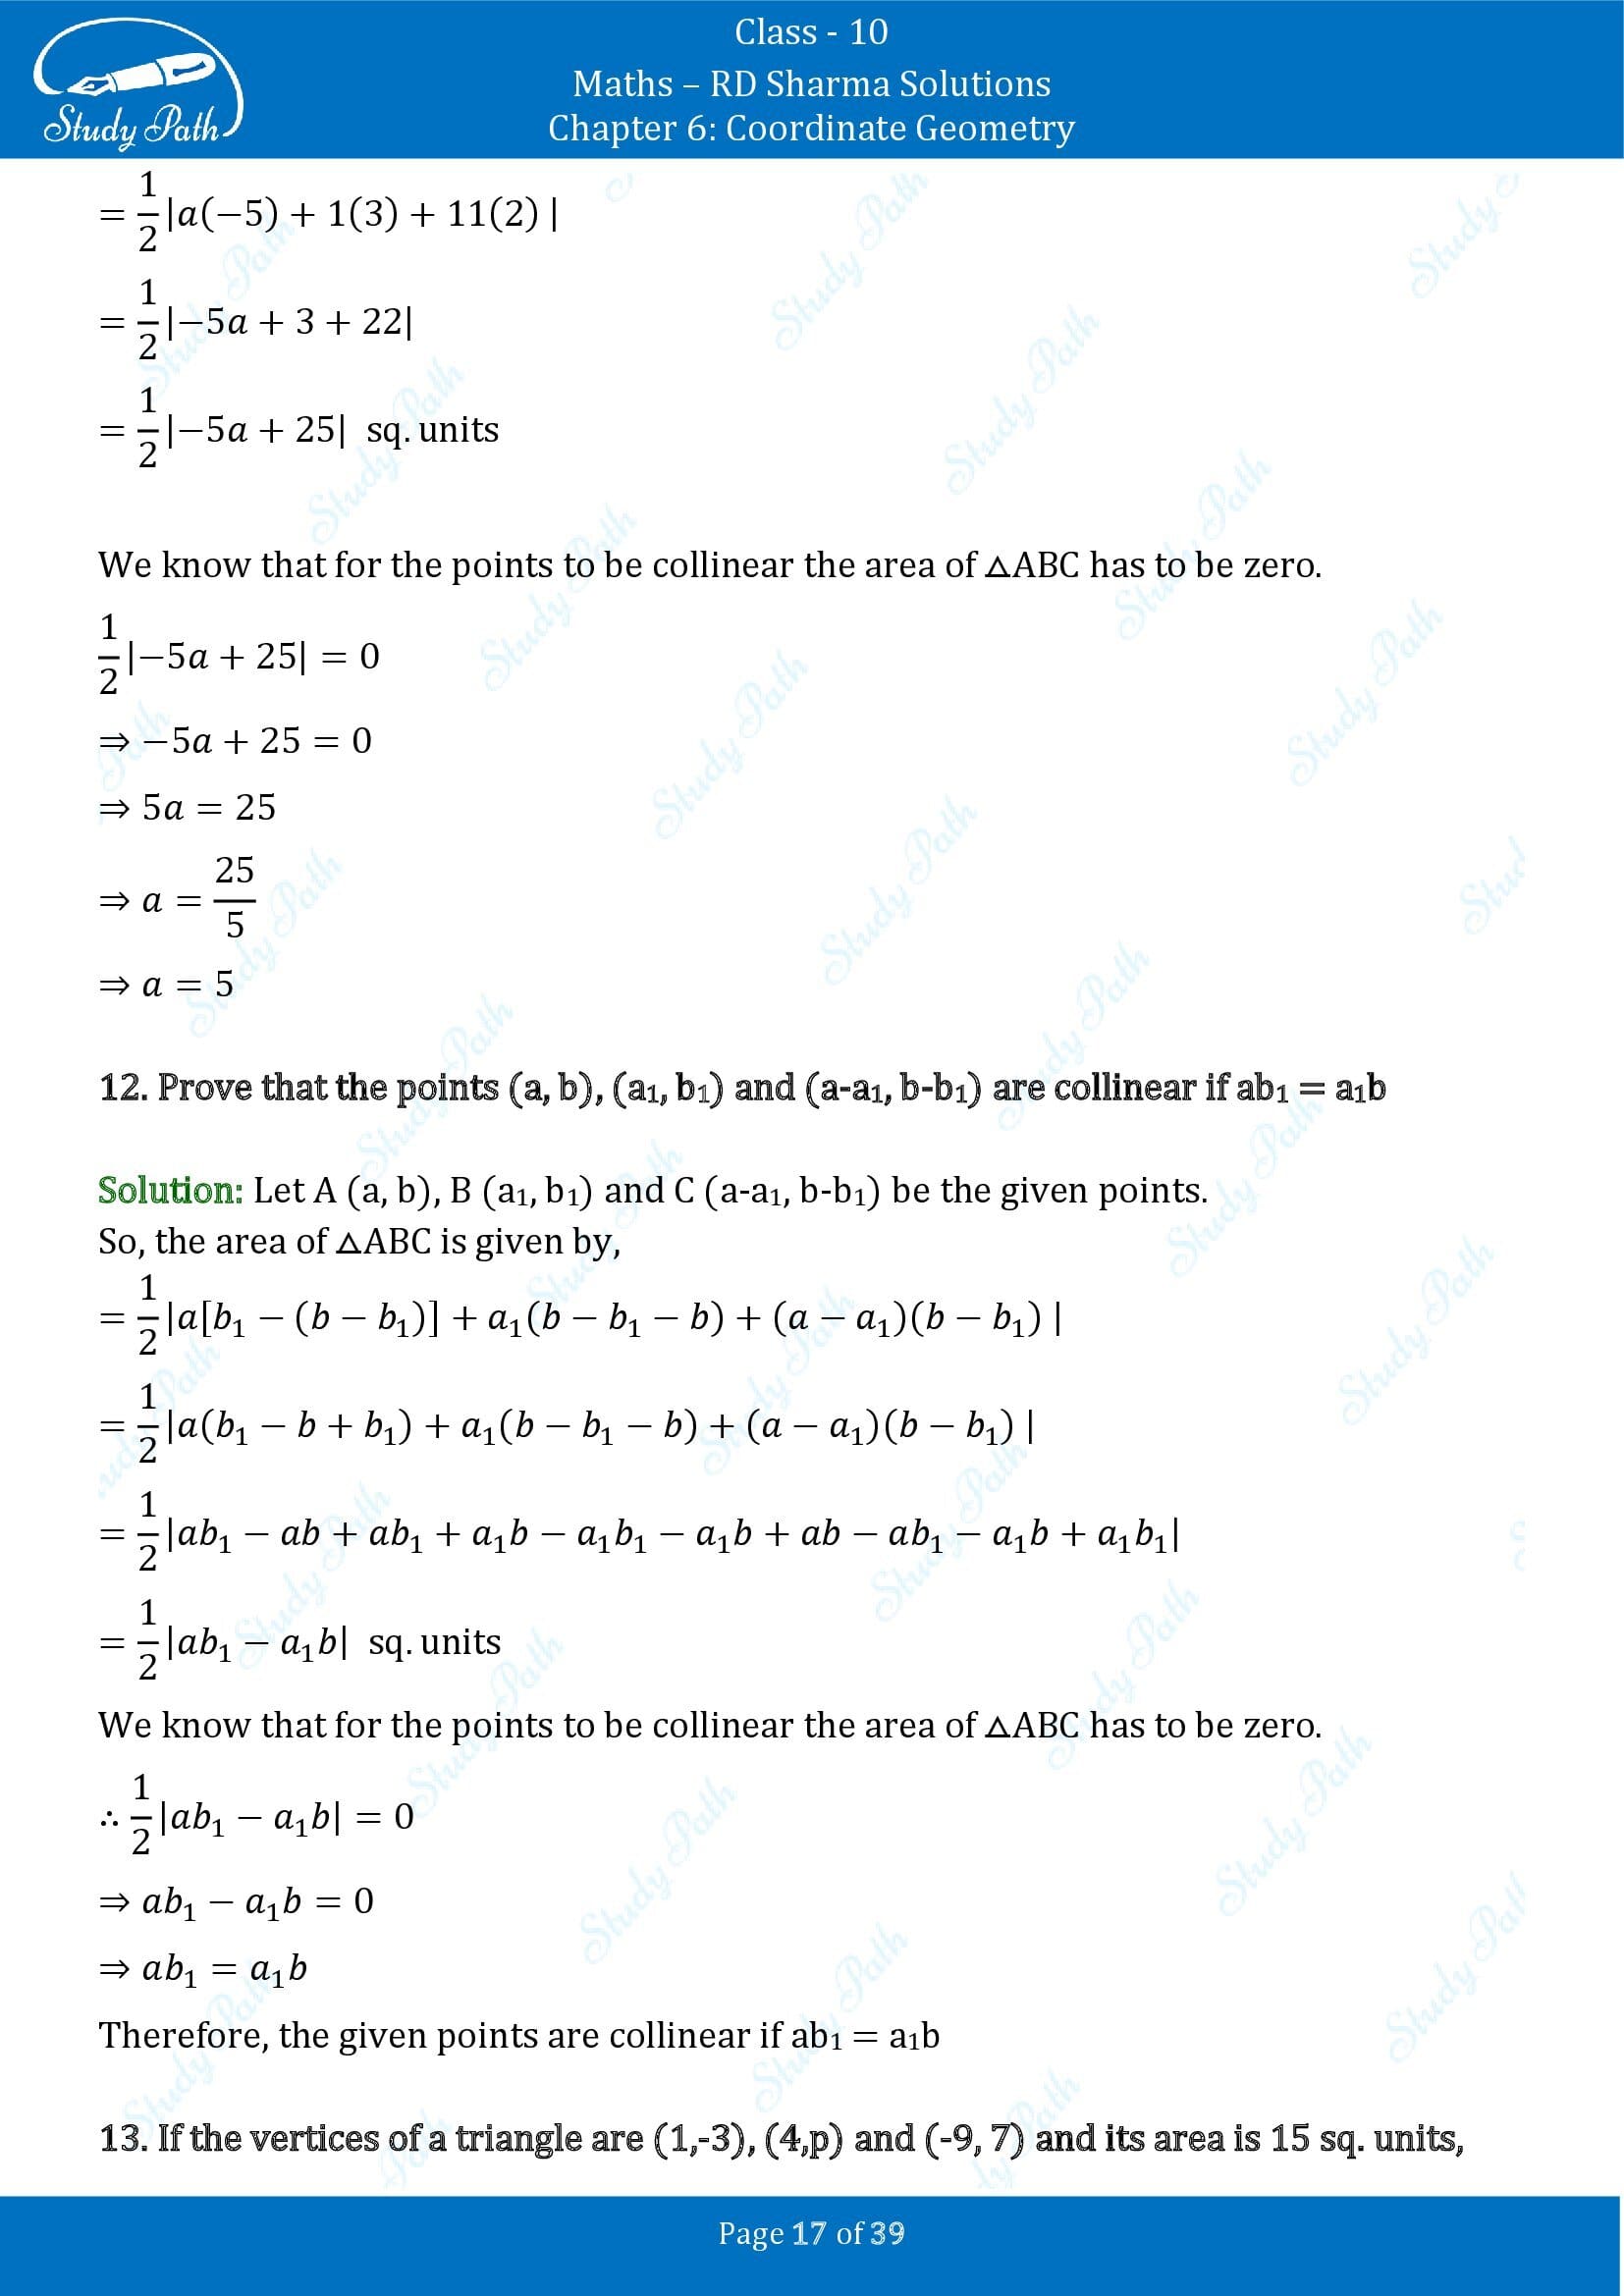 RD Sharma Solutions Class 10 Chapter 6 Coordinate Geometry Exercise 6.5 0017